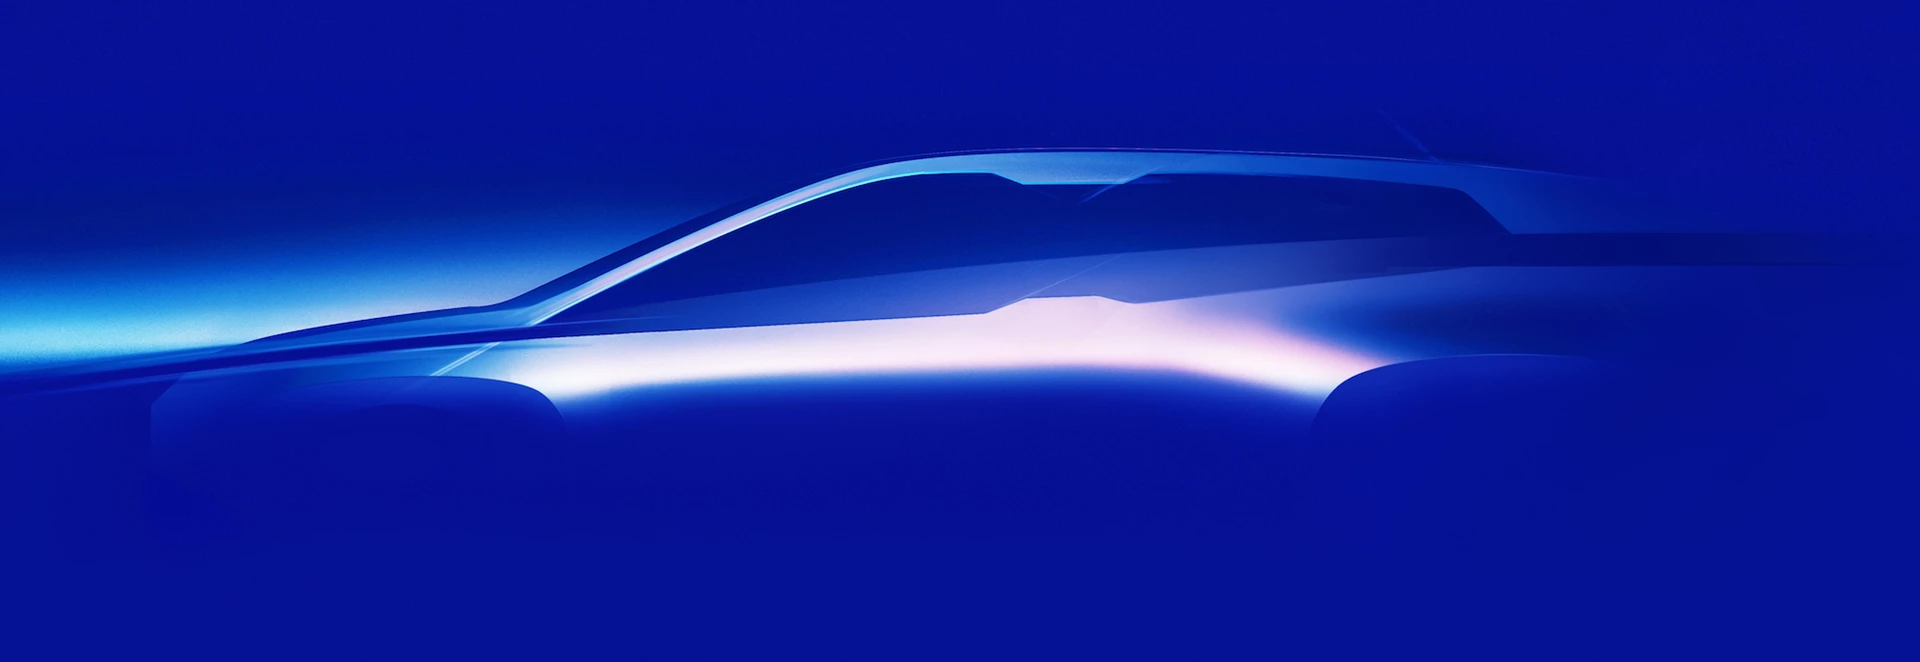 BMW teases latest all-electric concept – the iNext